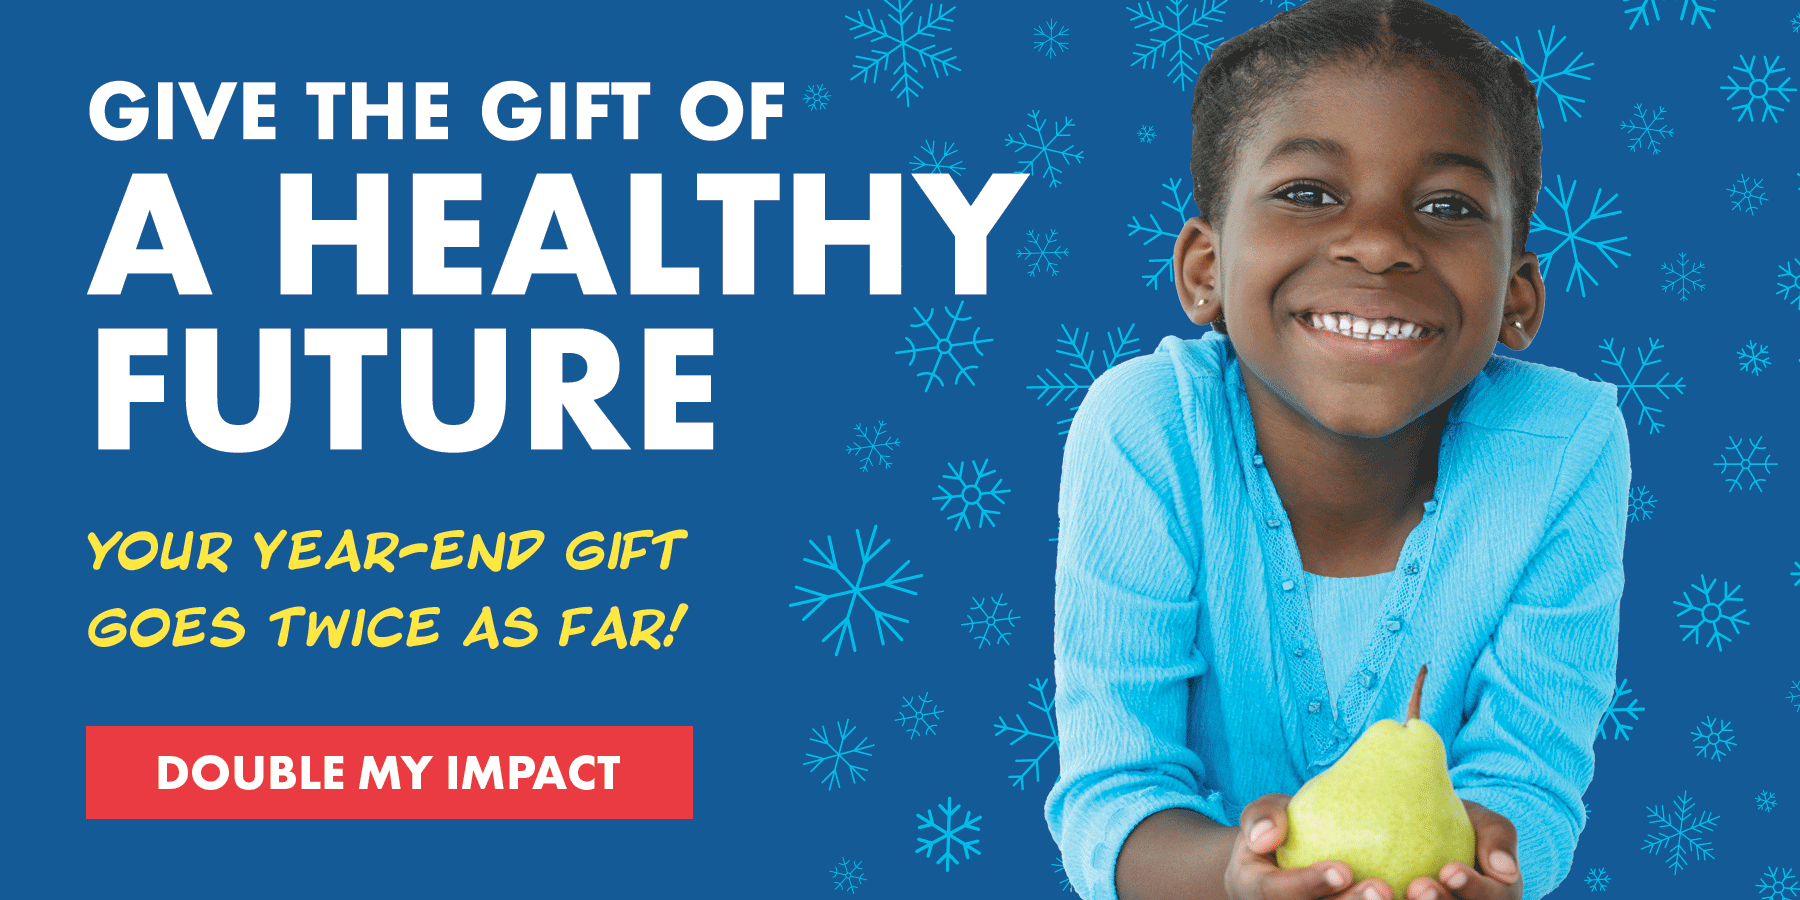 Give the gift of a healthy future - your year-end gift goes twice as far! - DOUBLE MY IMPACT